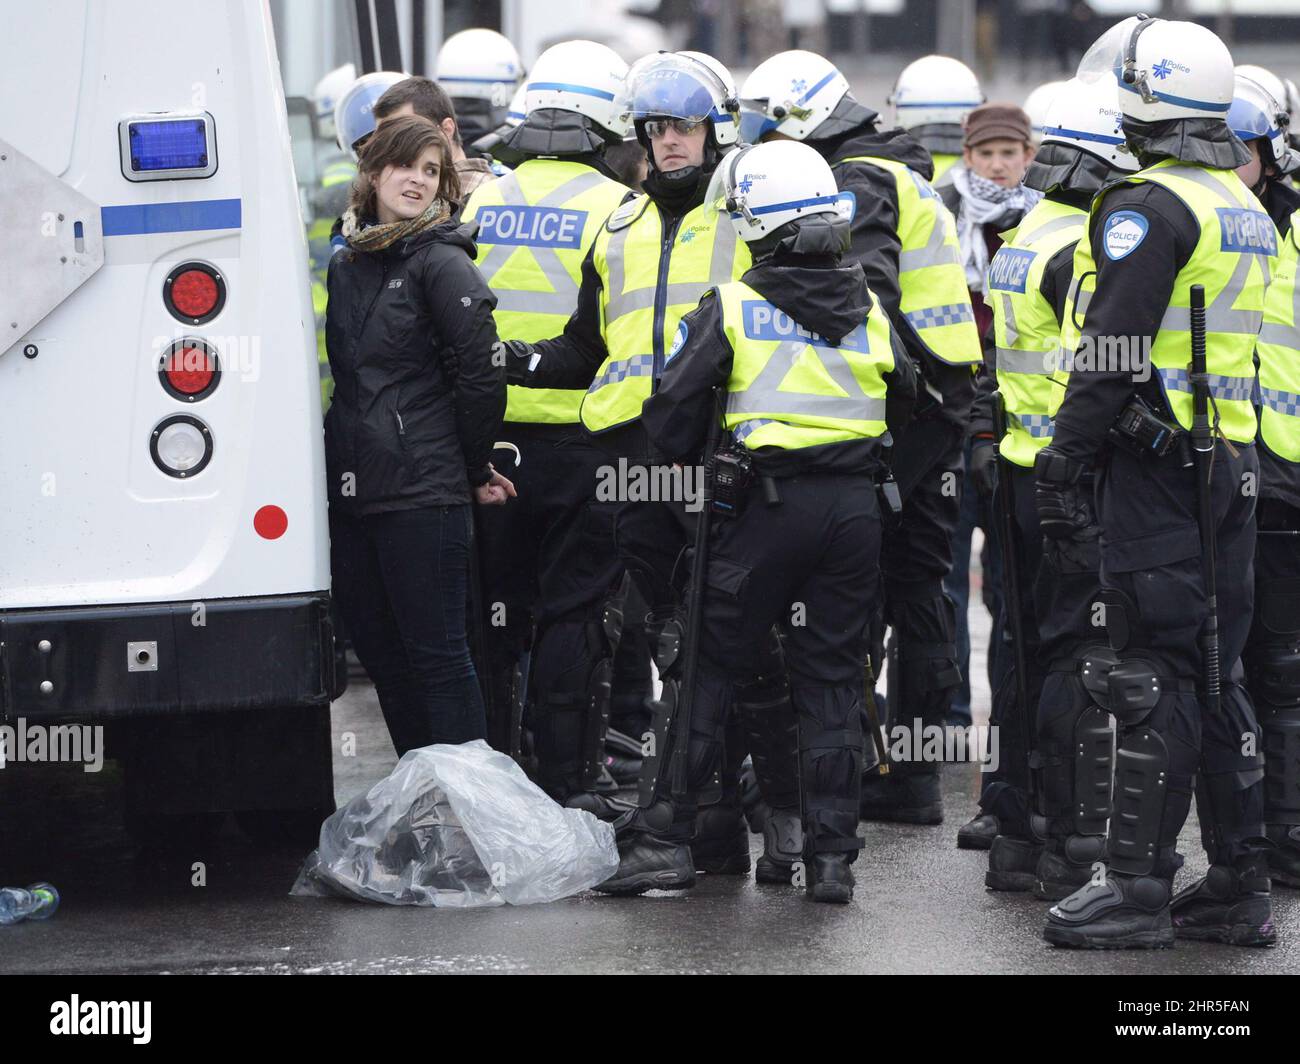 A protestor is arrested during an anti-police brutality demonstration in Montreal on Friday March 15, 2013. Police used horses, pepper-spray and kettling tactics to clamp down Friday on an annual protest that has a history of getting rowdy.THE CANADIAN PRESS/Ryan Remiorz Stock Photo